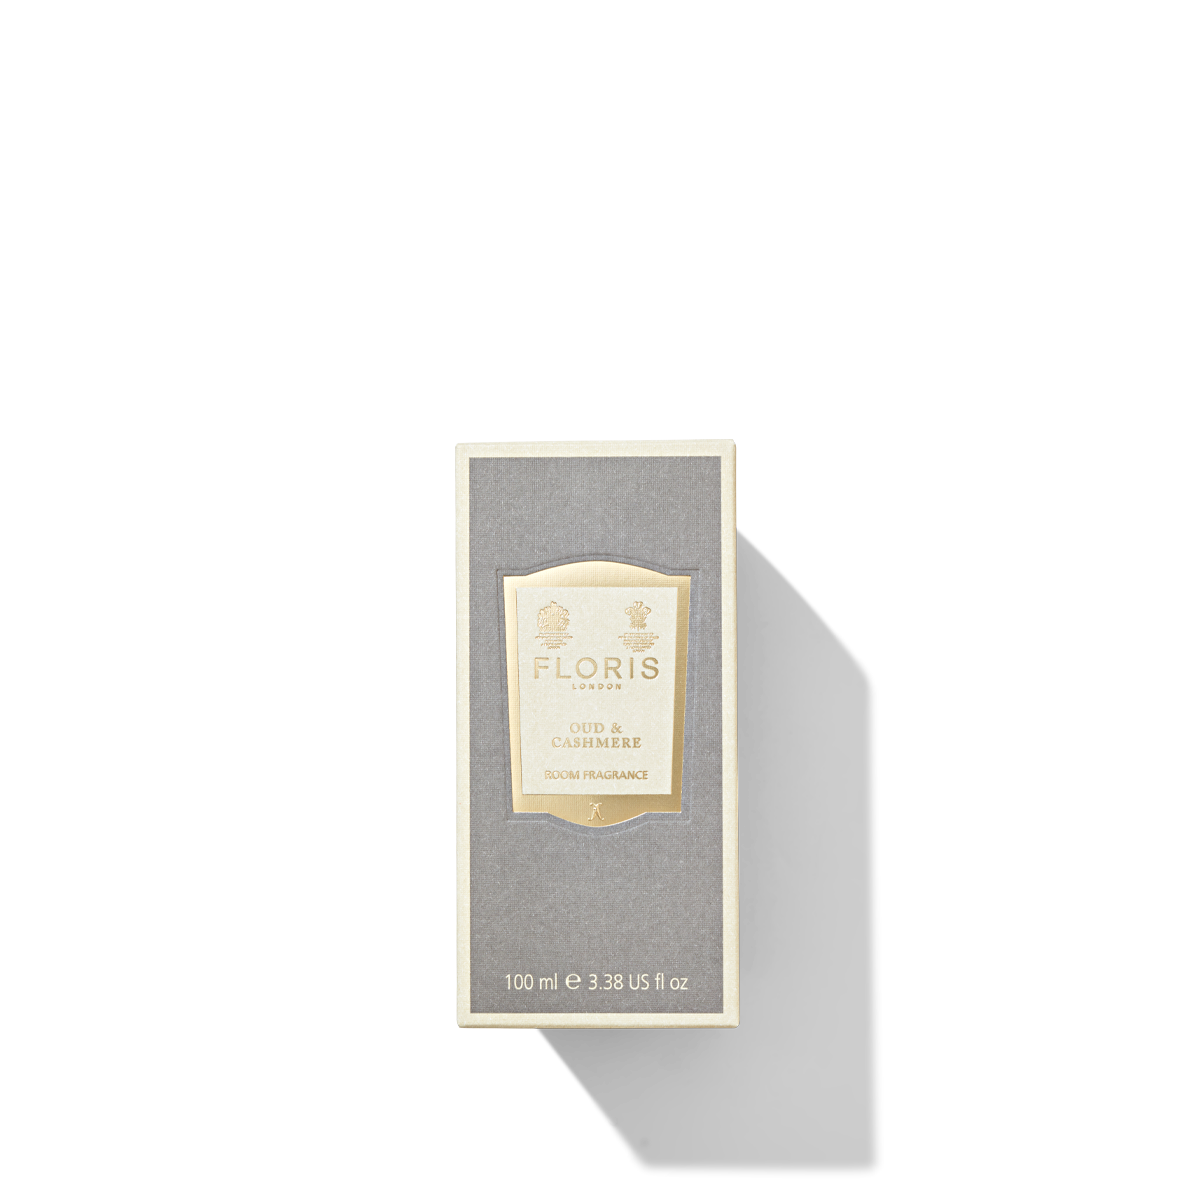 Medium grey box with a cream and gold label containing the Oud & Cashmere Room Fragrance.